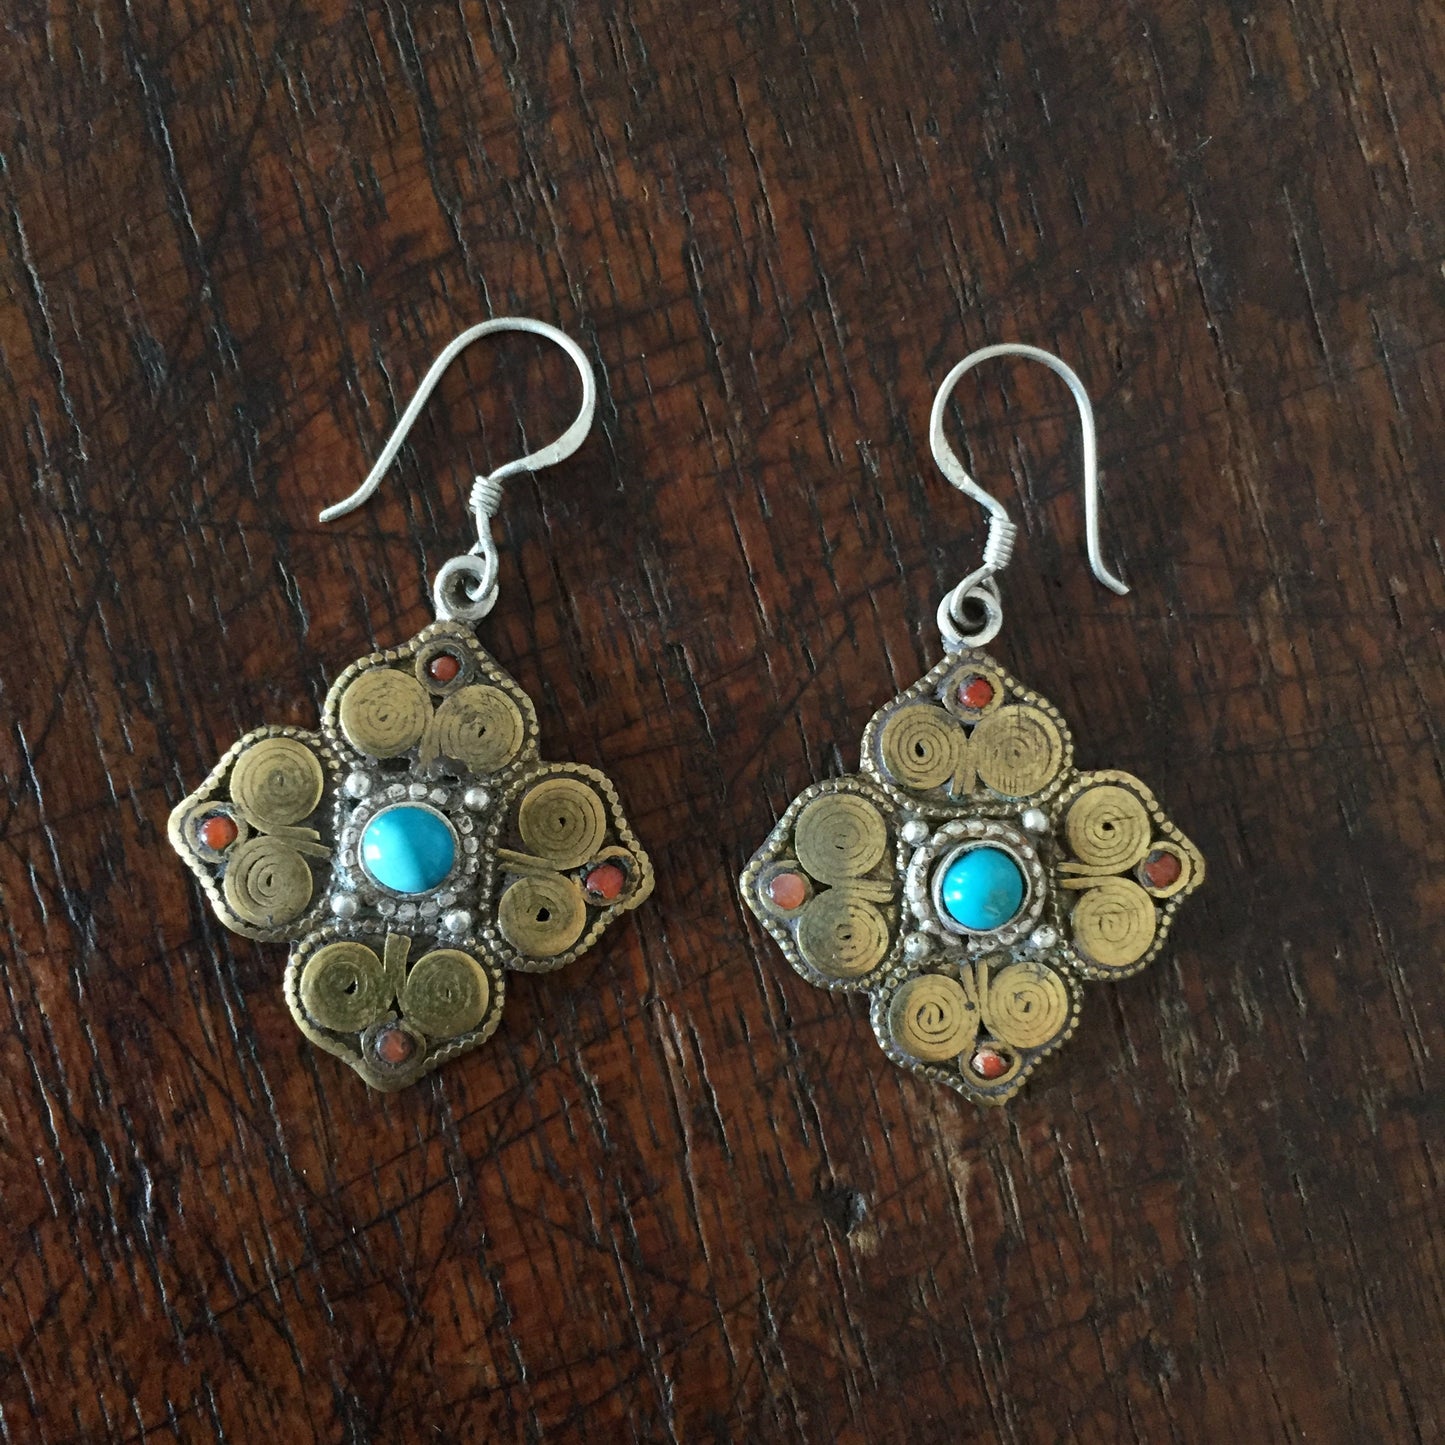 Coral & Turquoise Inlay Earrings